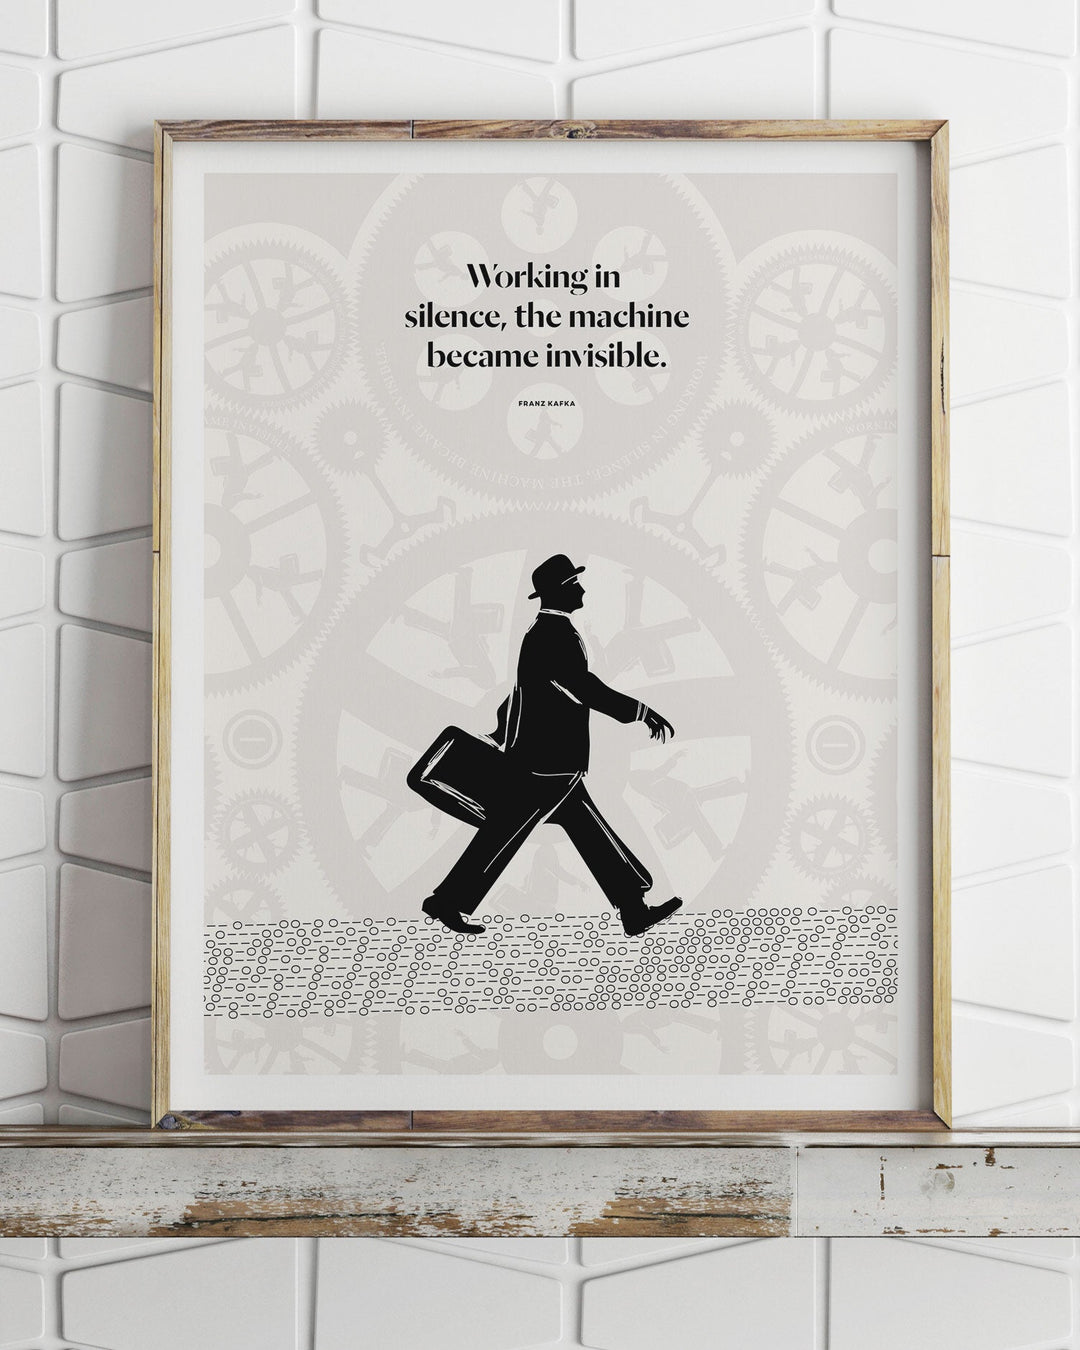 Franz Kafka - "Working in silence, the machine became invisible" print